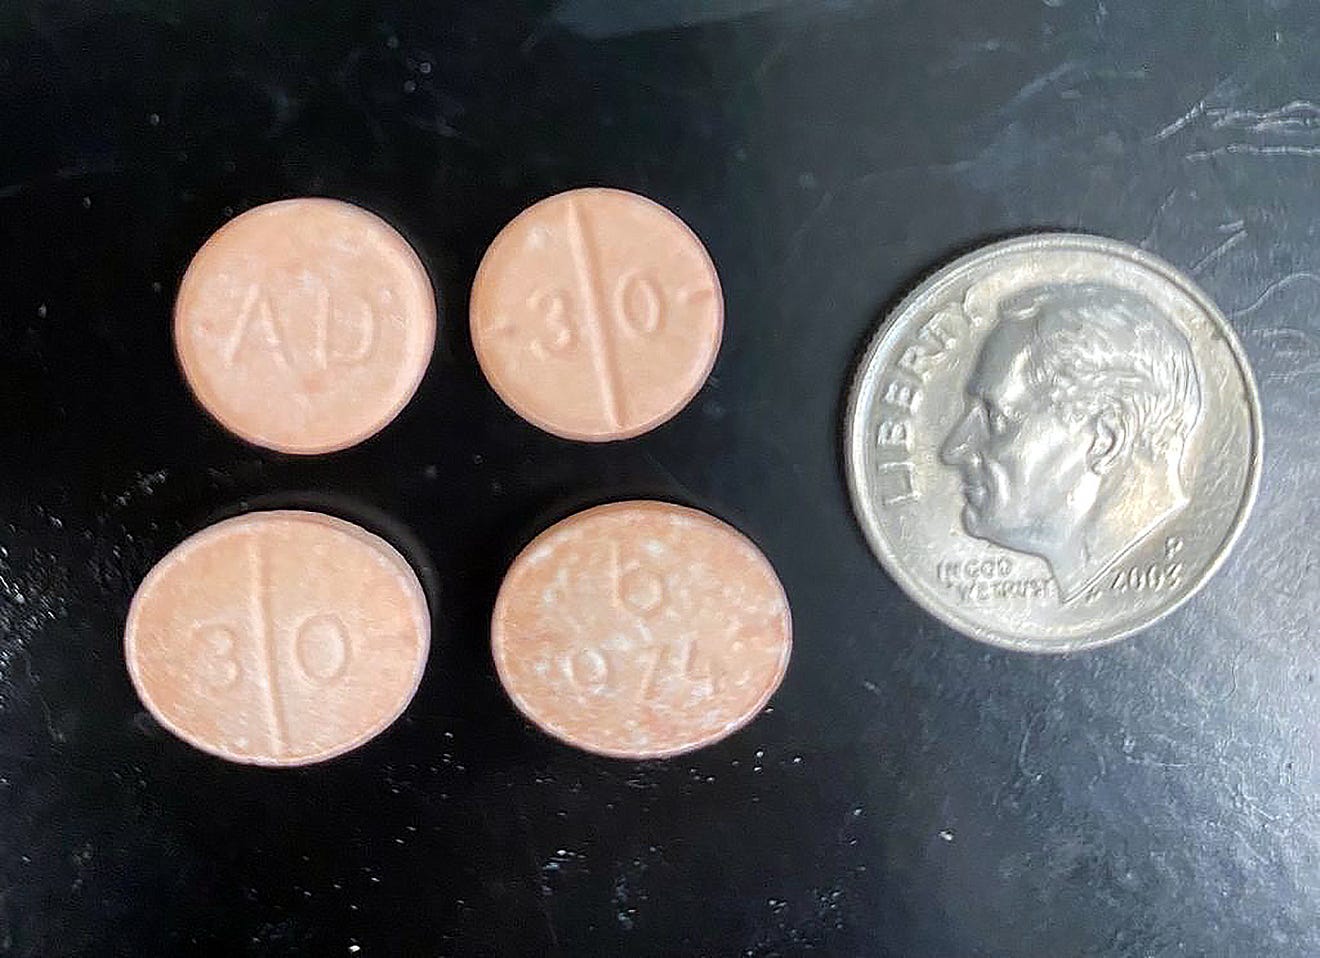 orange pills with a dime for size reference